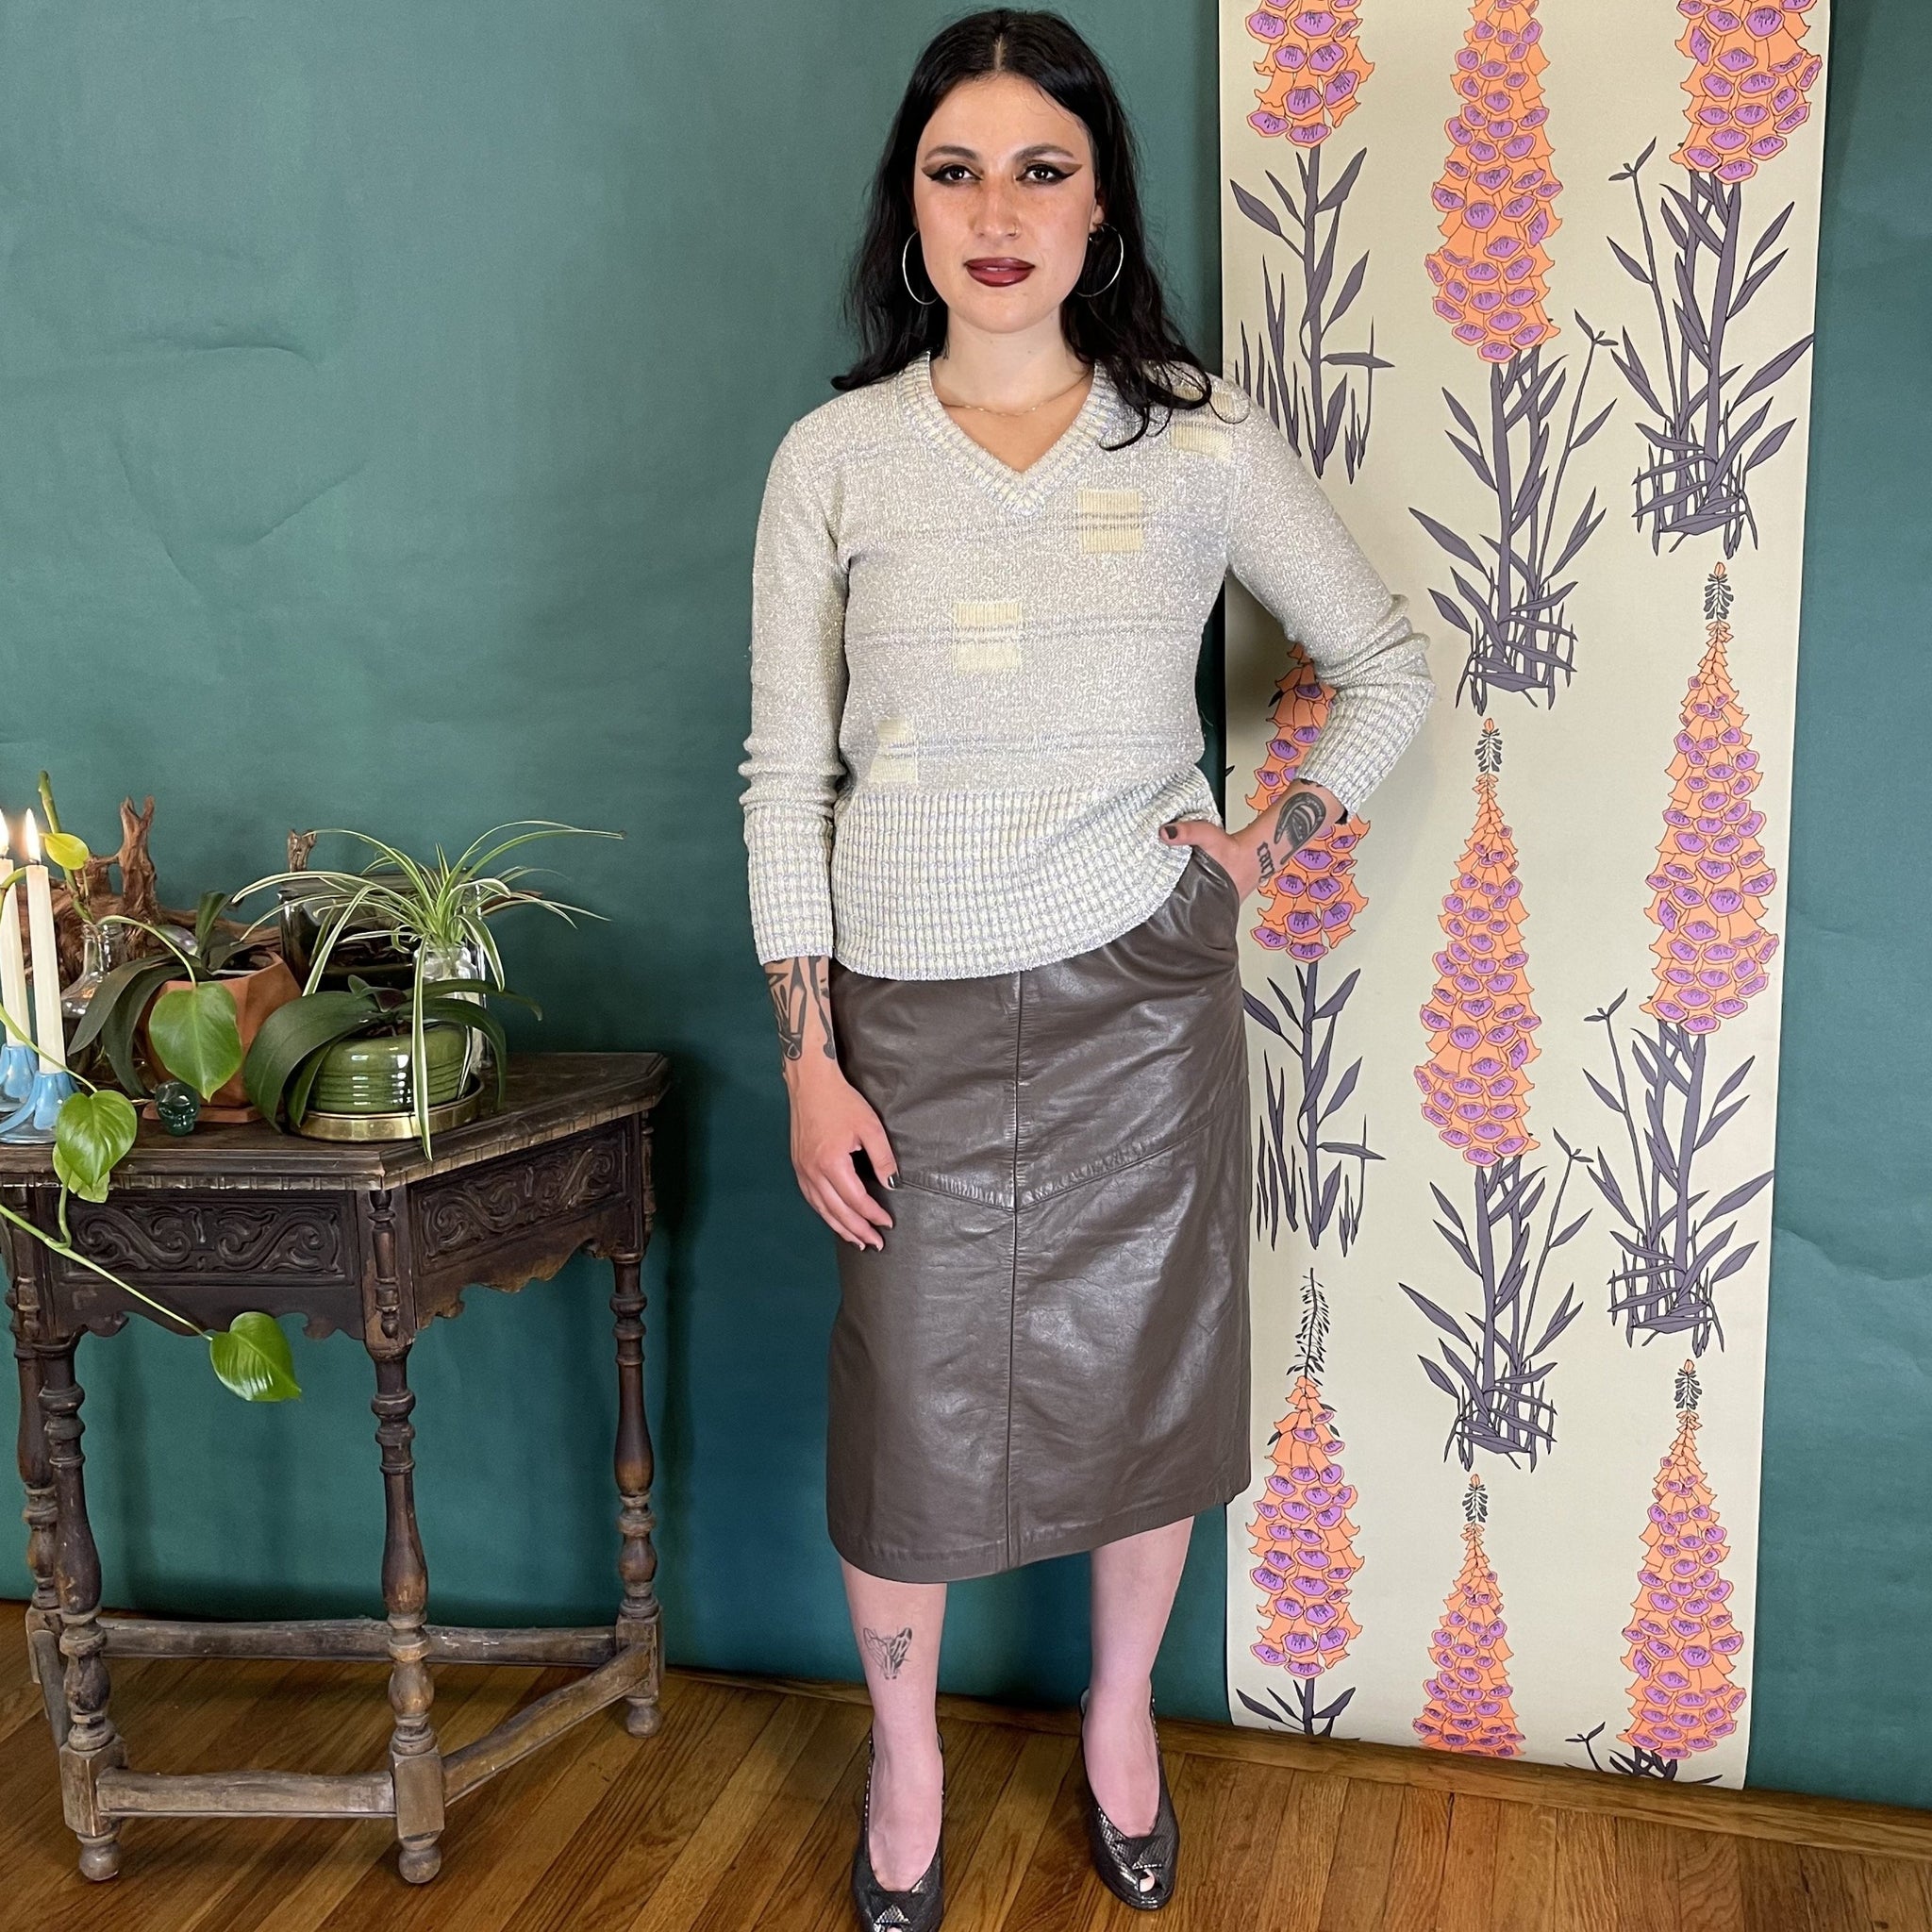 Olive nappa leather skirt